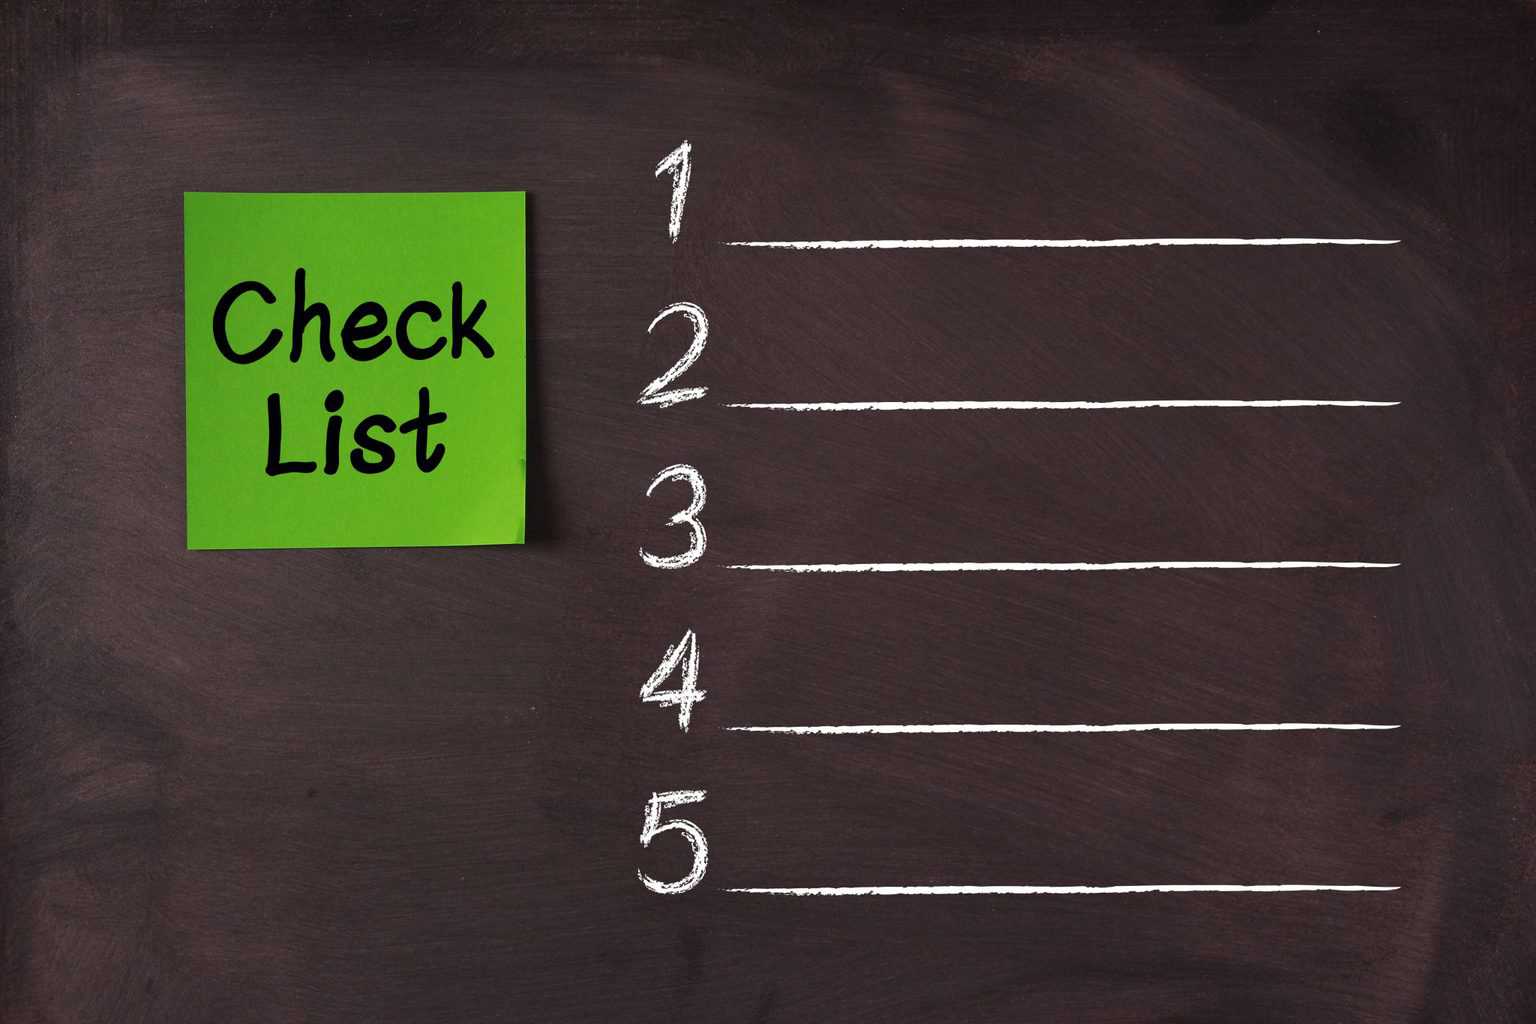 Checklist with 5 blank lines